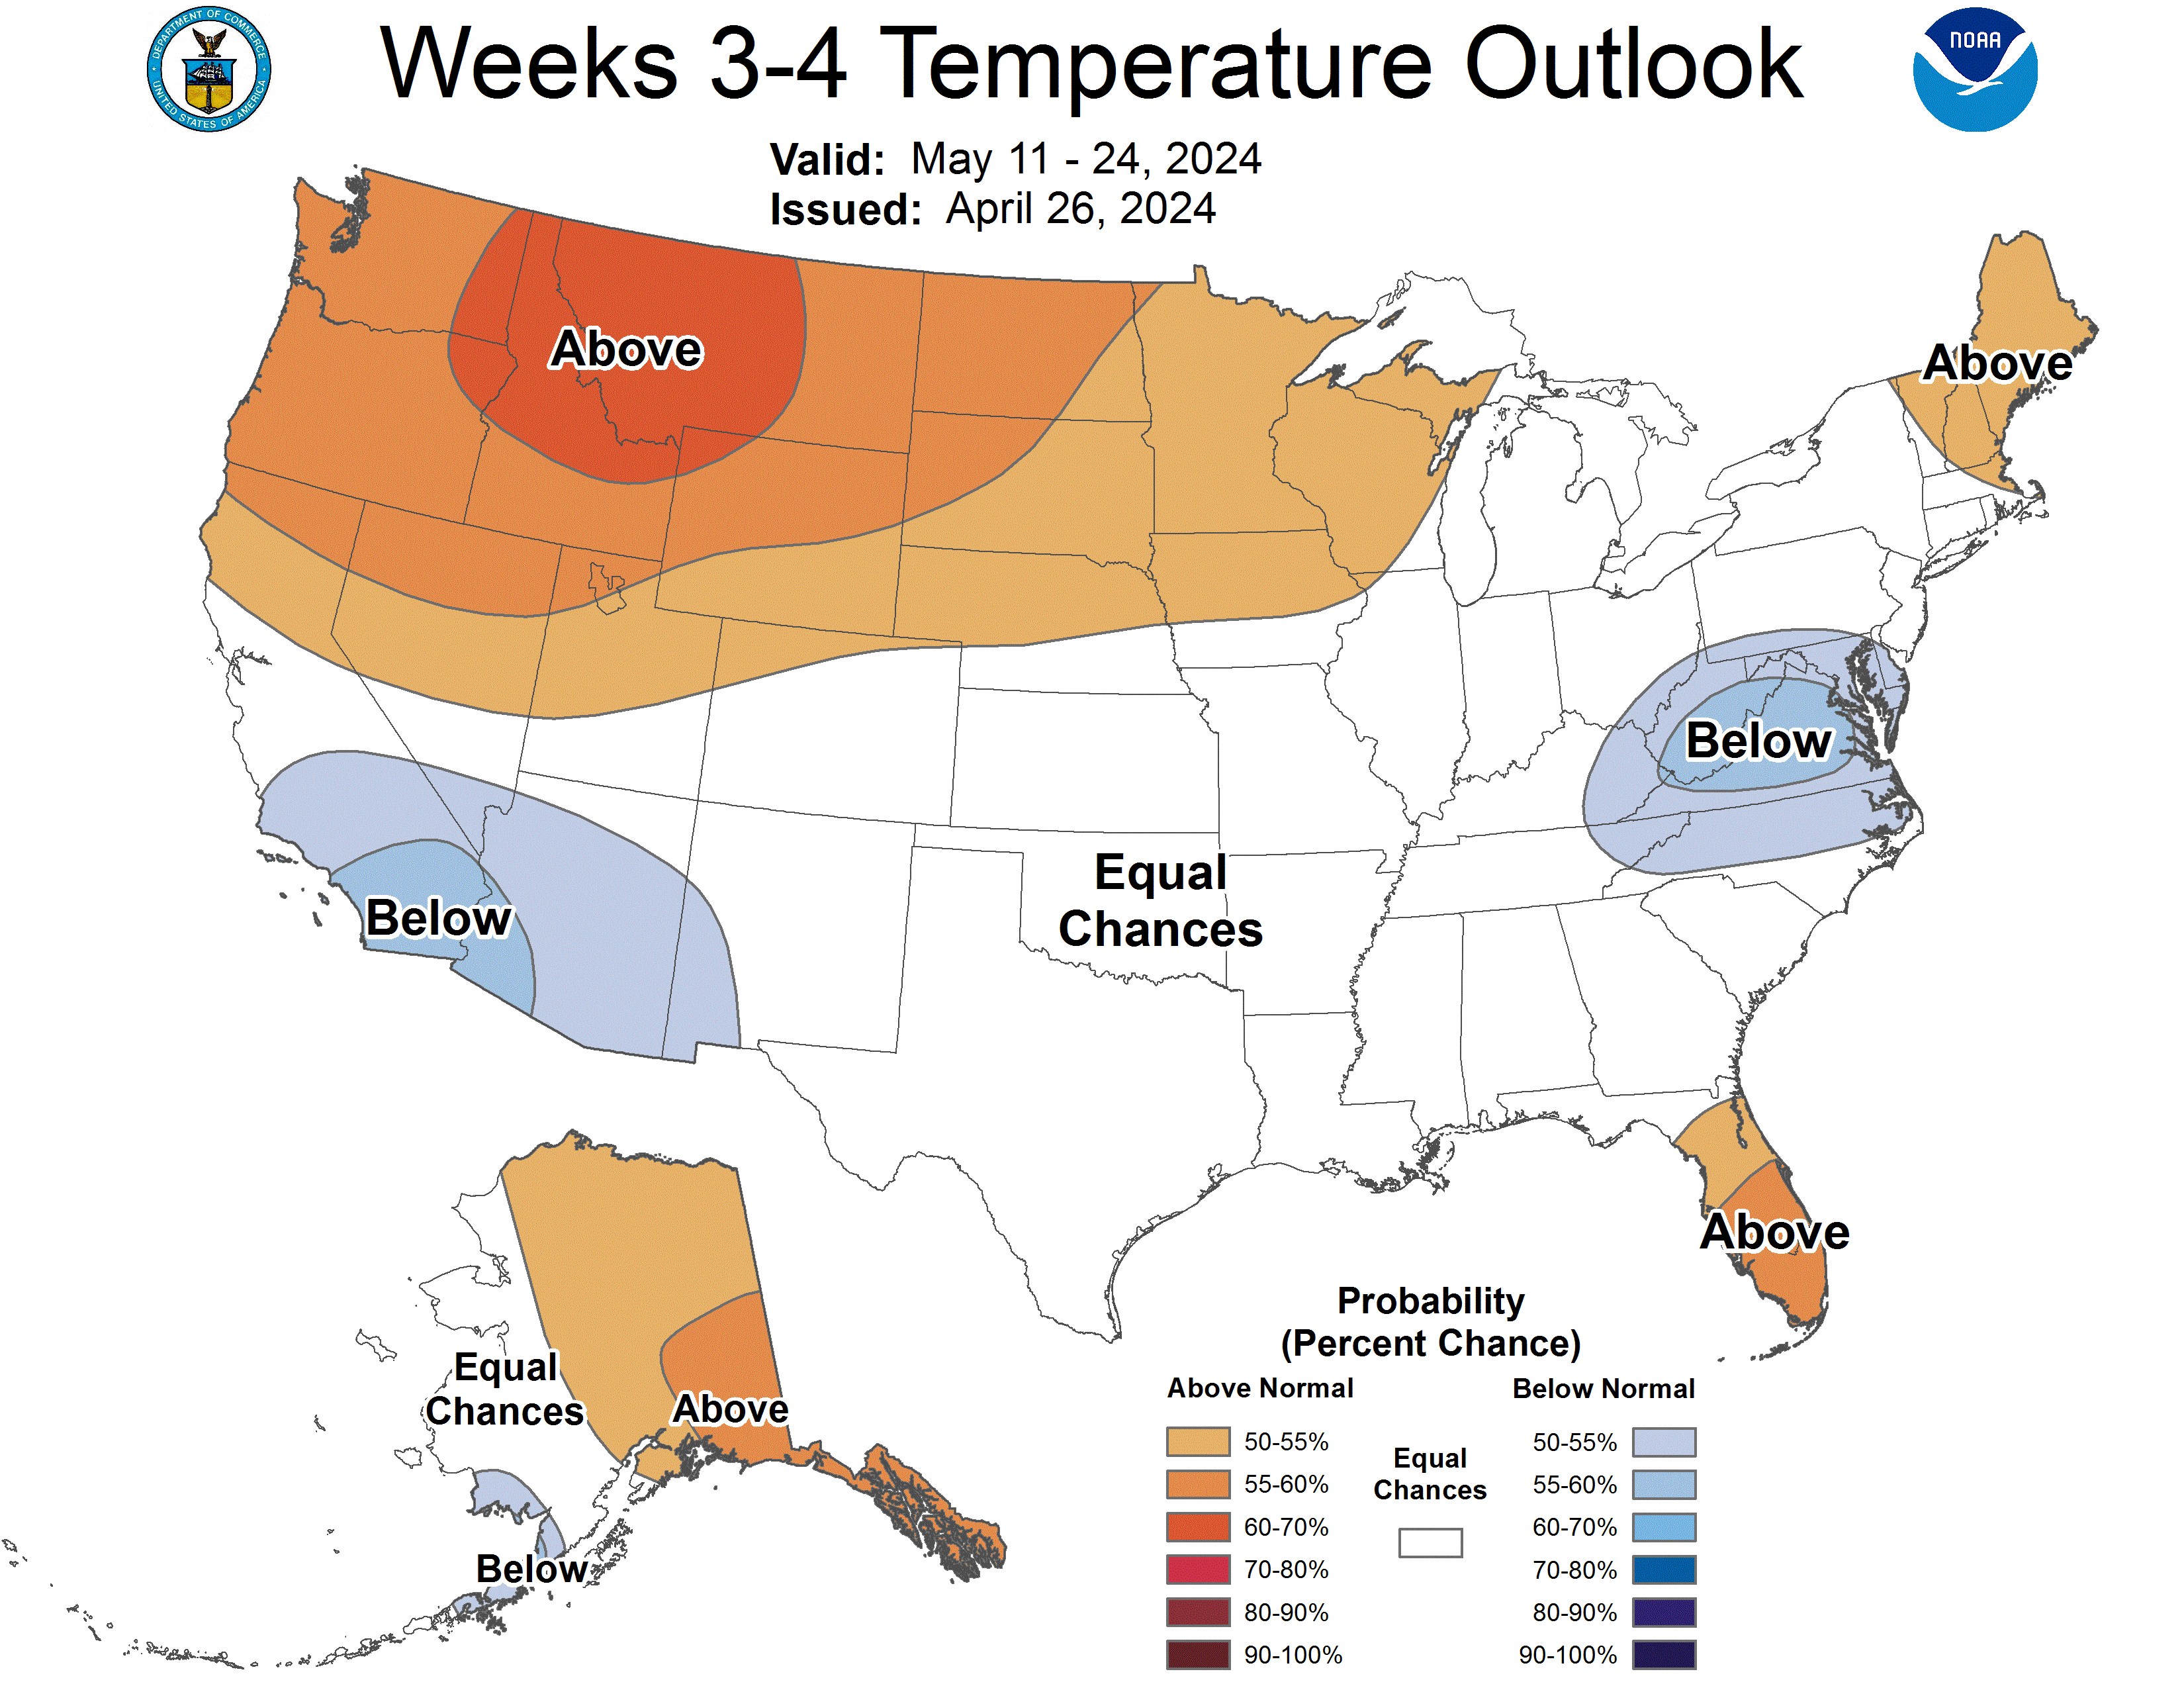 Latest Week 3-4 Temperature Outlook graphic